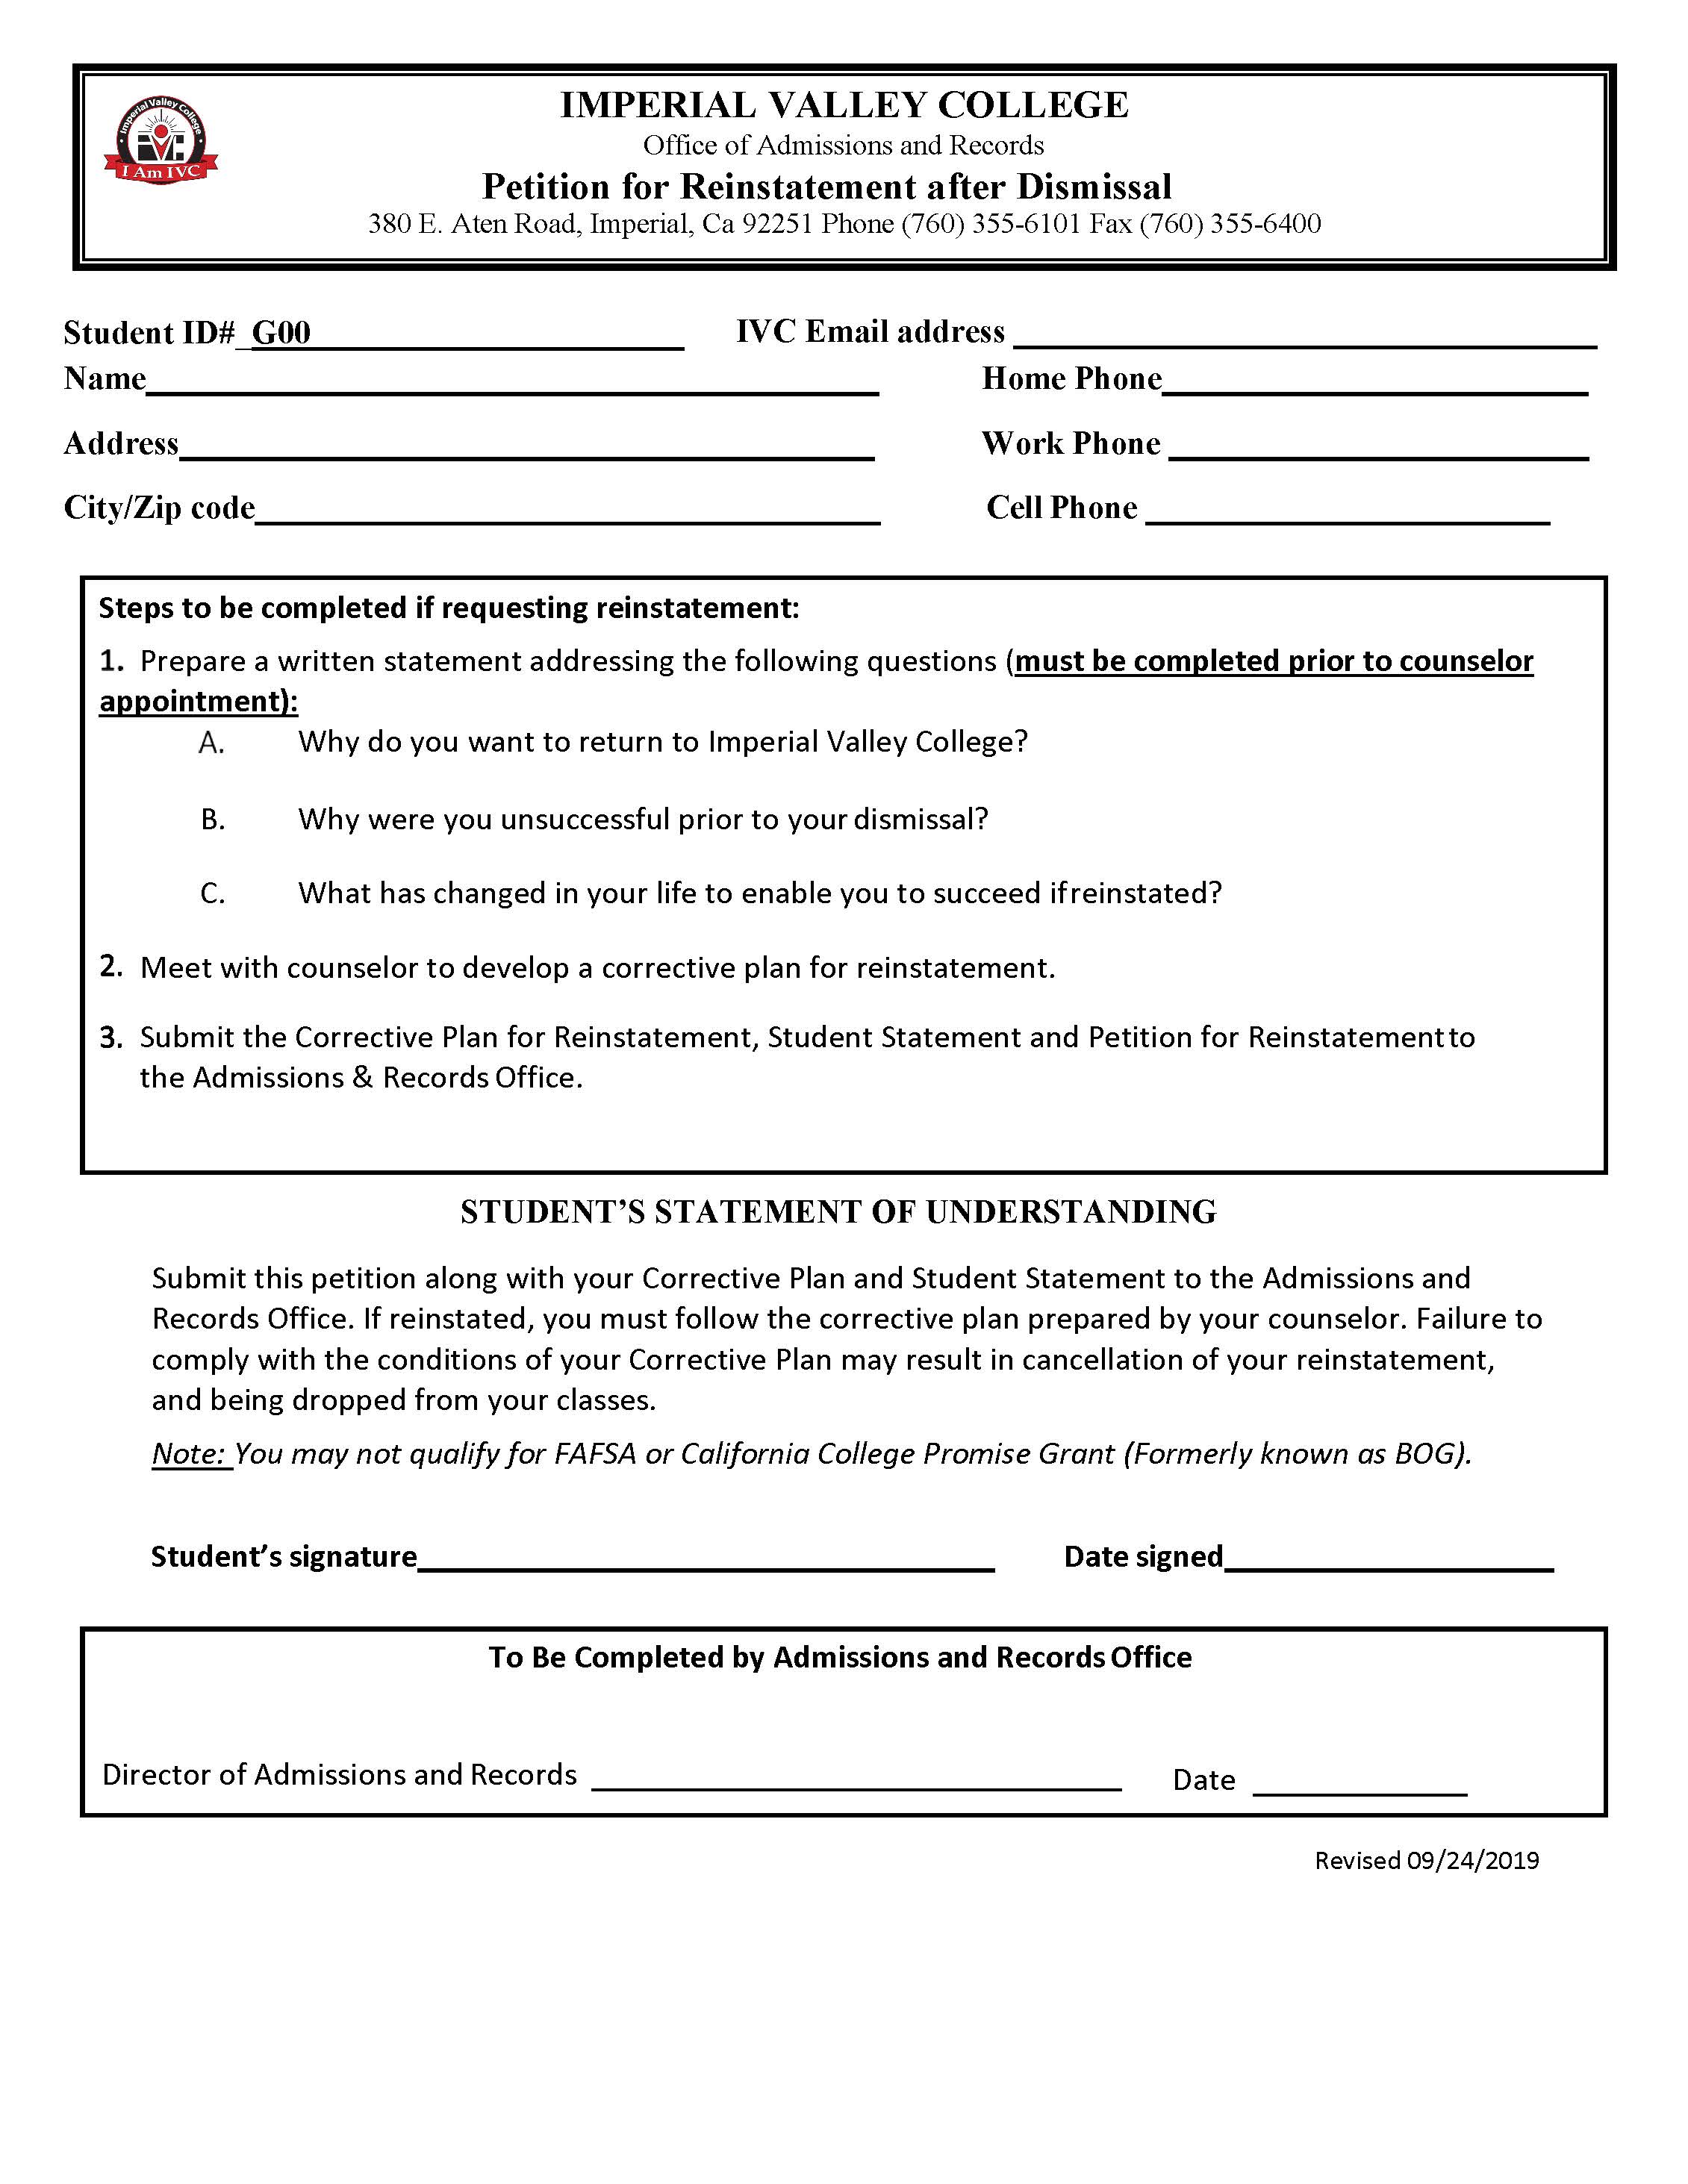 Petition for Reinstatement After Dismissal & Counselor's Form